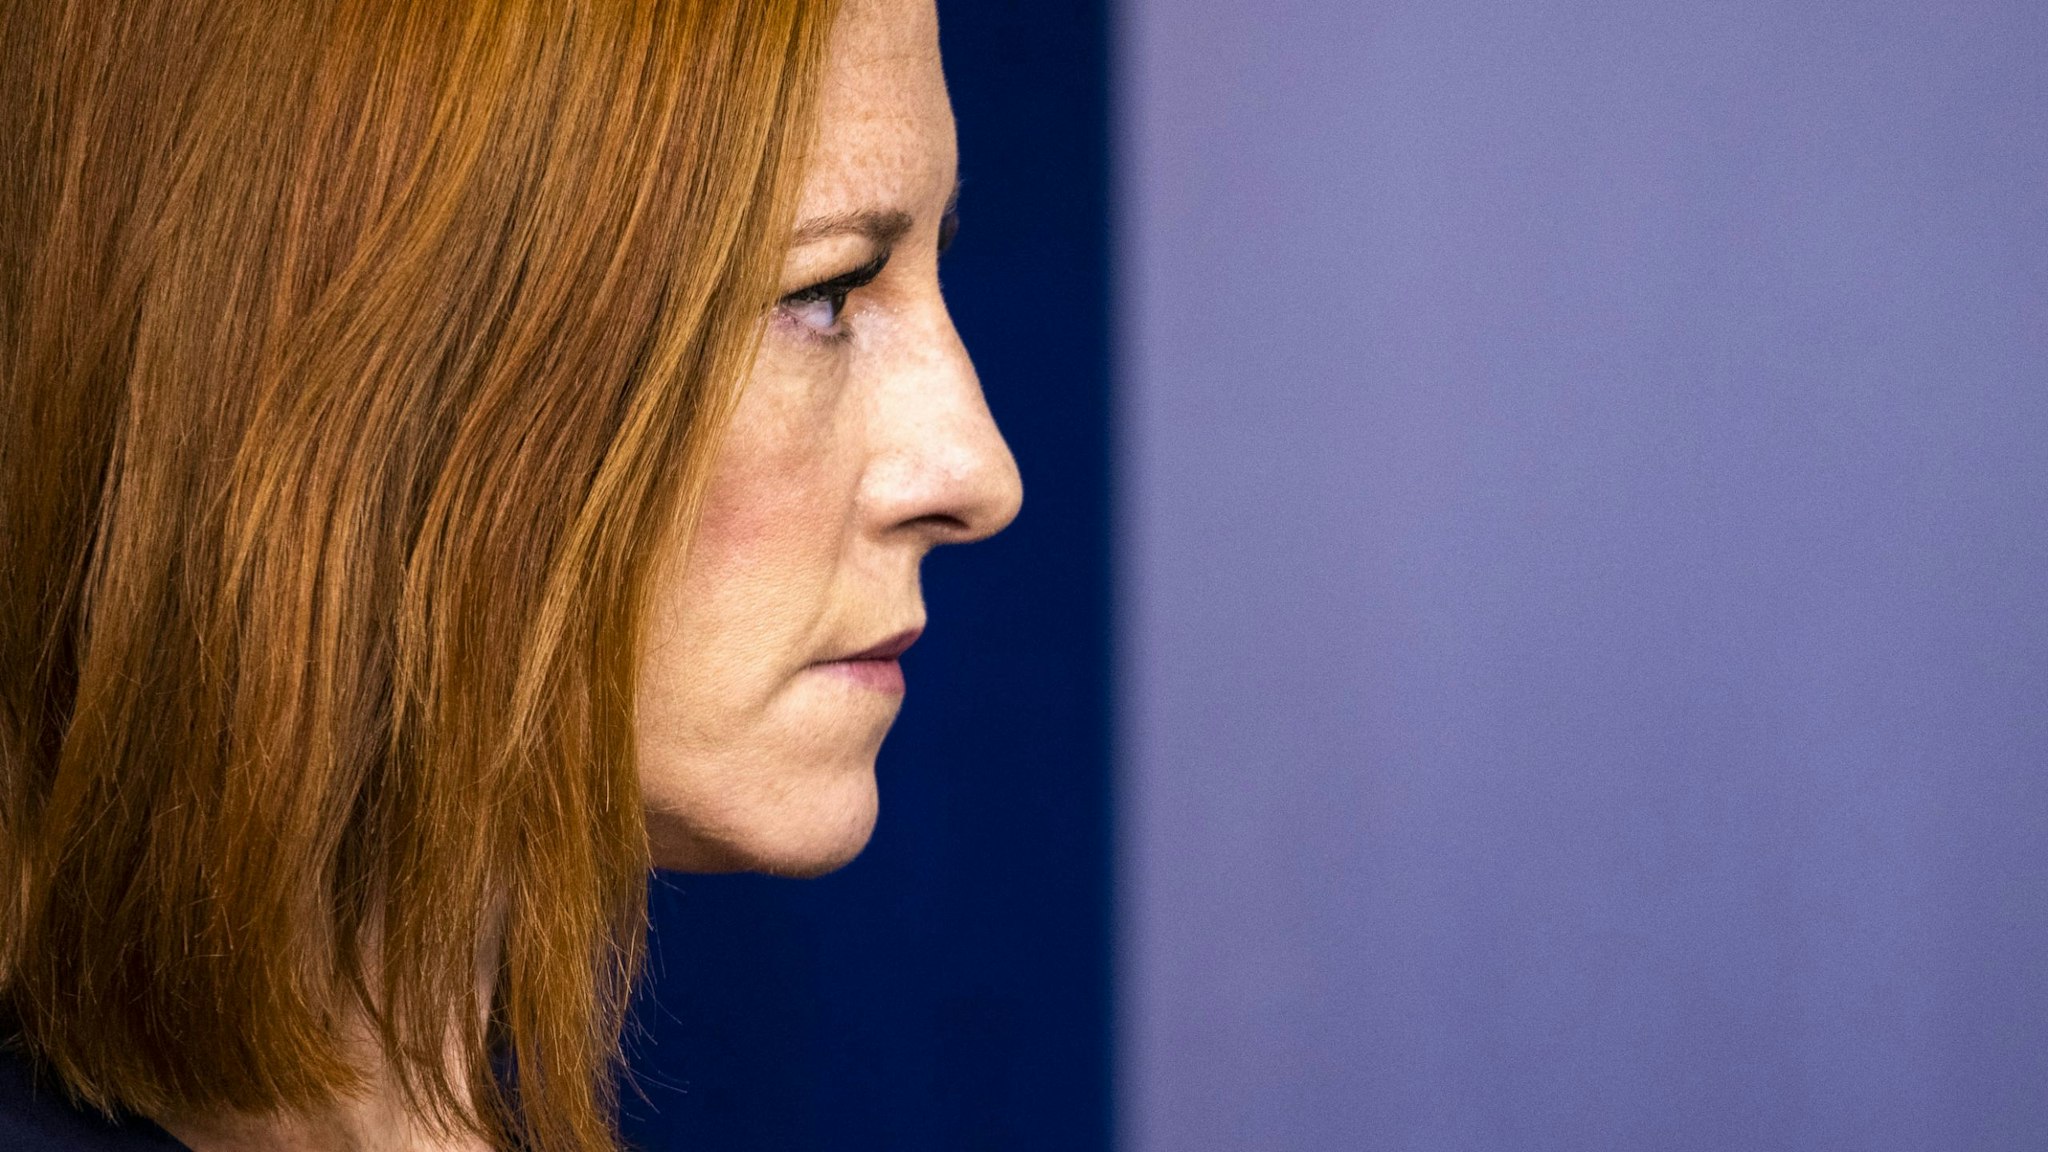 Jen Psaki, White House press secretary, during a news conference in the James S. Brady Press Briefing Room at the White House in Washington, D.C., U.S., on Friday, July 2, 2021. The pace of U.S. hiring accelerated in June, with payrolls gaining the most in 10 months, suggesting firms are having greater success recruiting workers to keep pace with the economy's reopening.